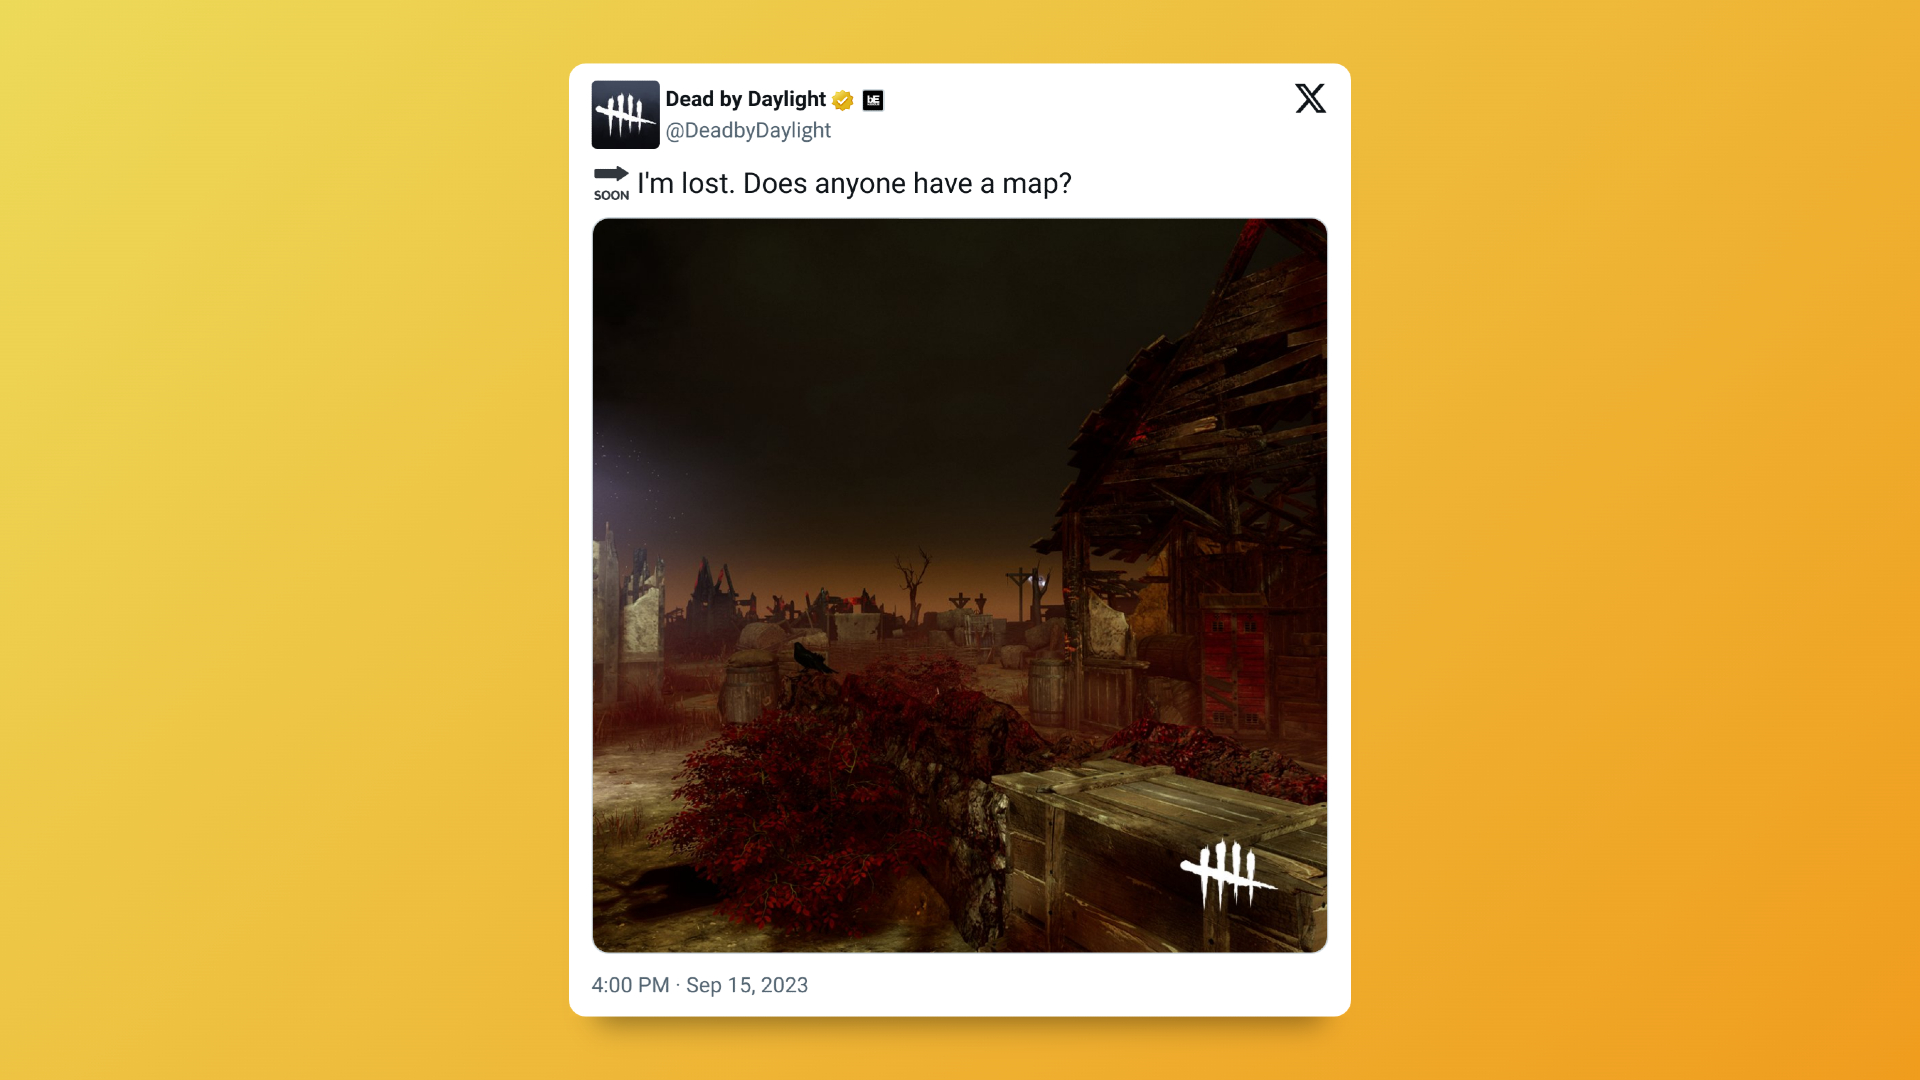 Tweet from Dead by Daylight devs hinting toward the map rework